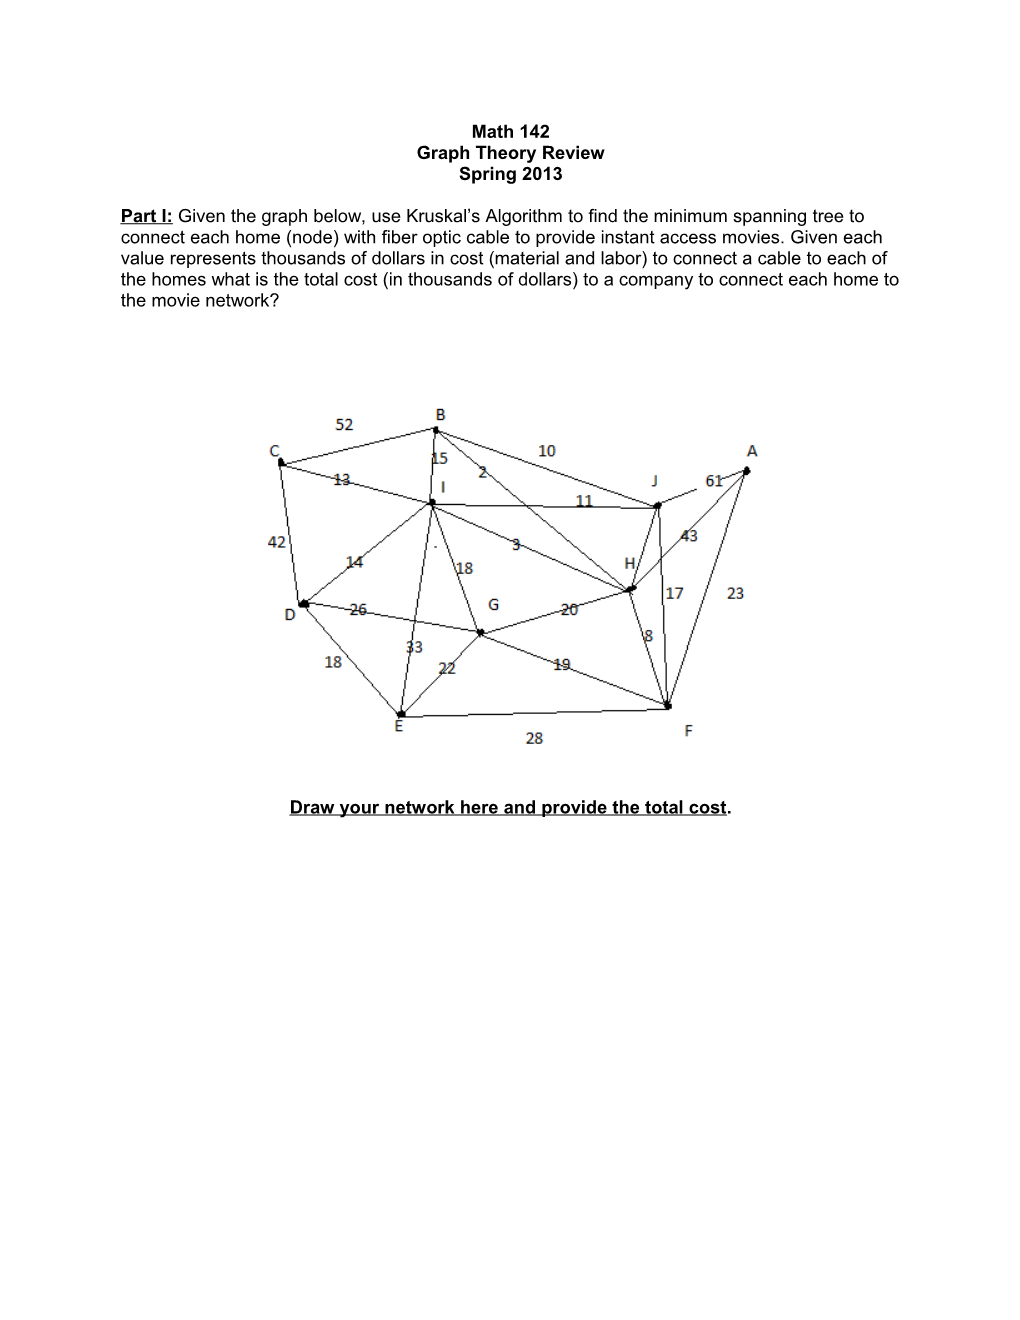 Draw Your Network Here and Provide the Total Cost